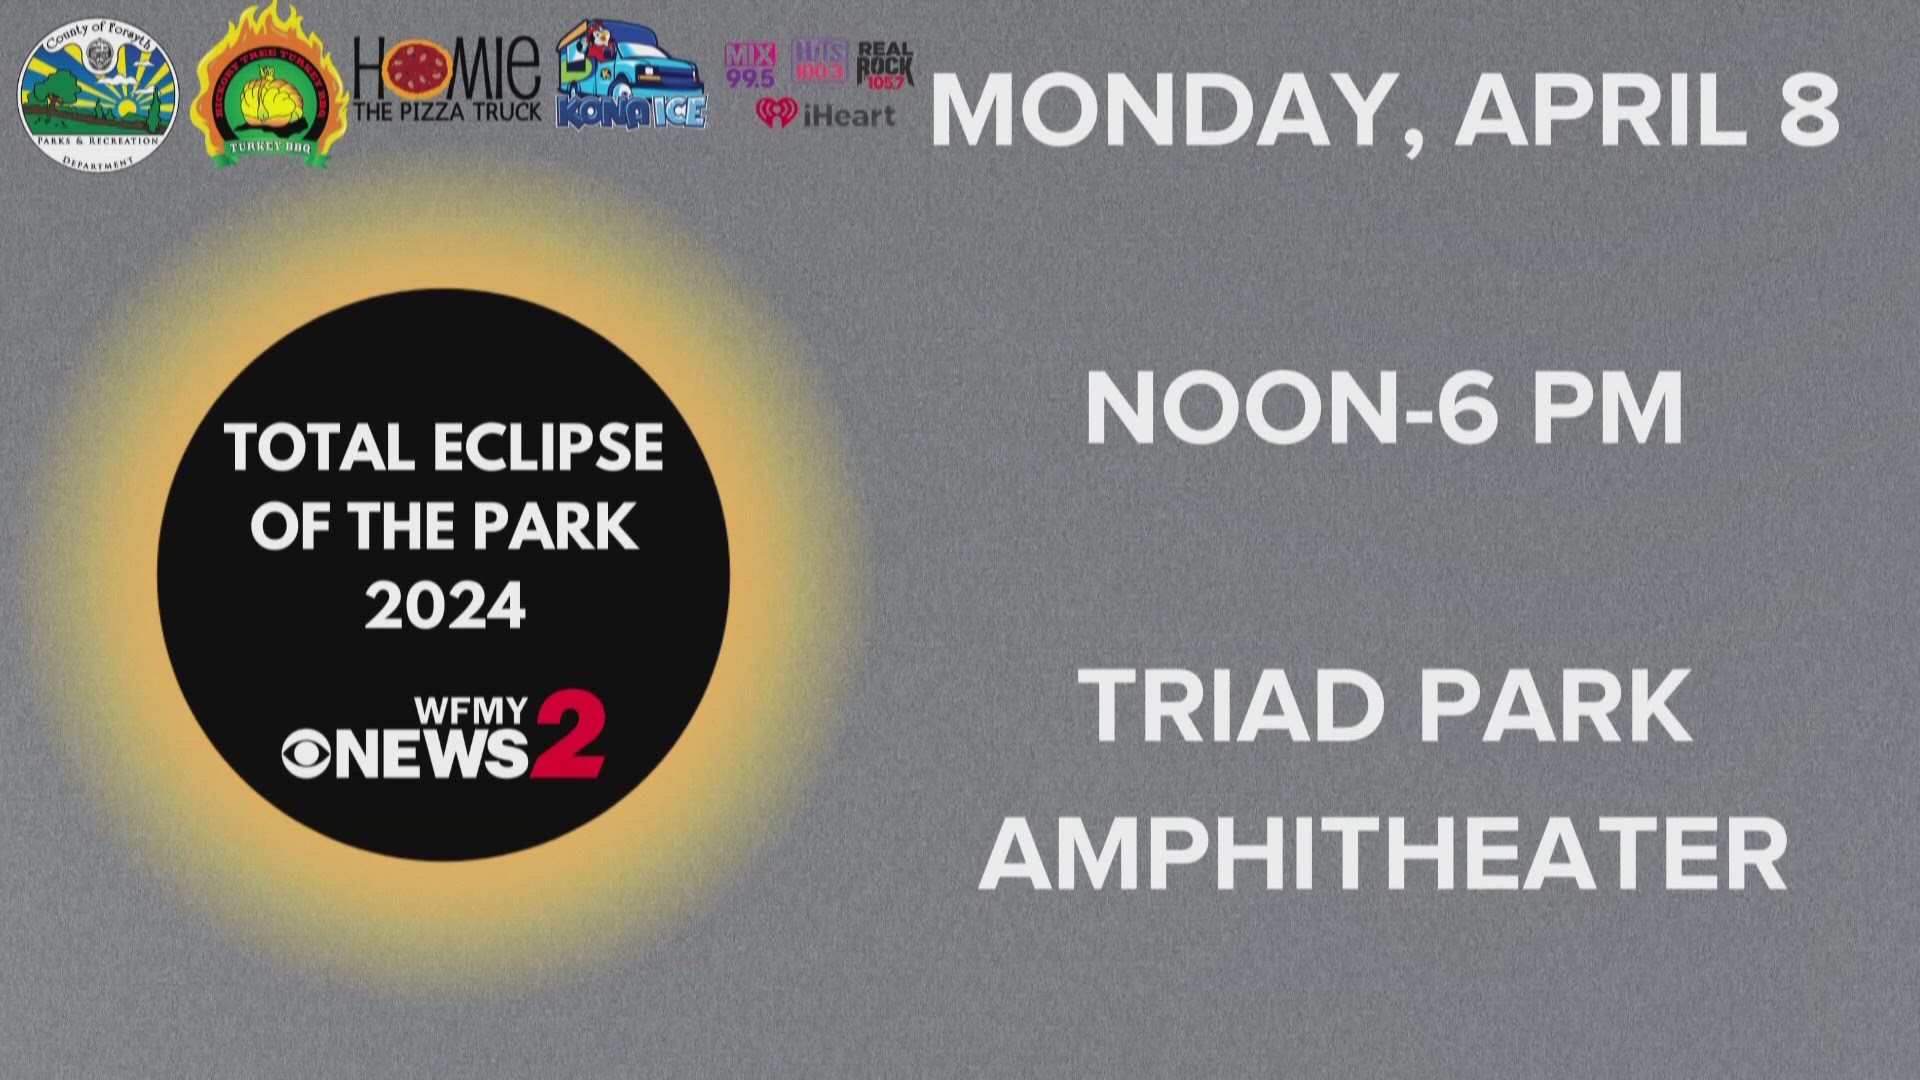 Join WFMY News 2 to experience the eclipse today at the Triad Park Amphitheatre in Kernersville.